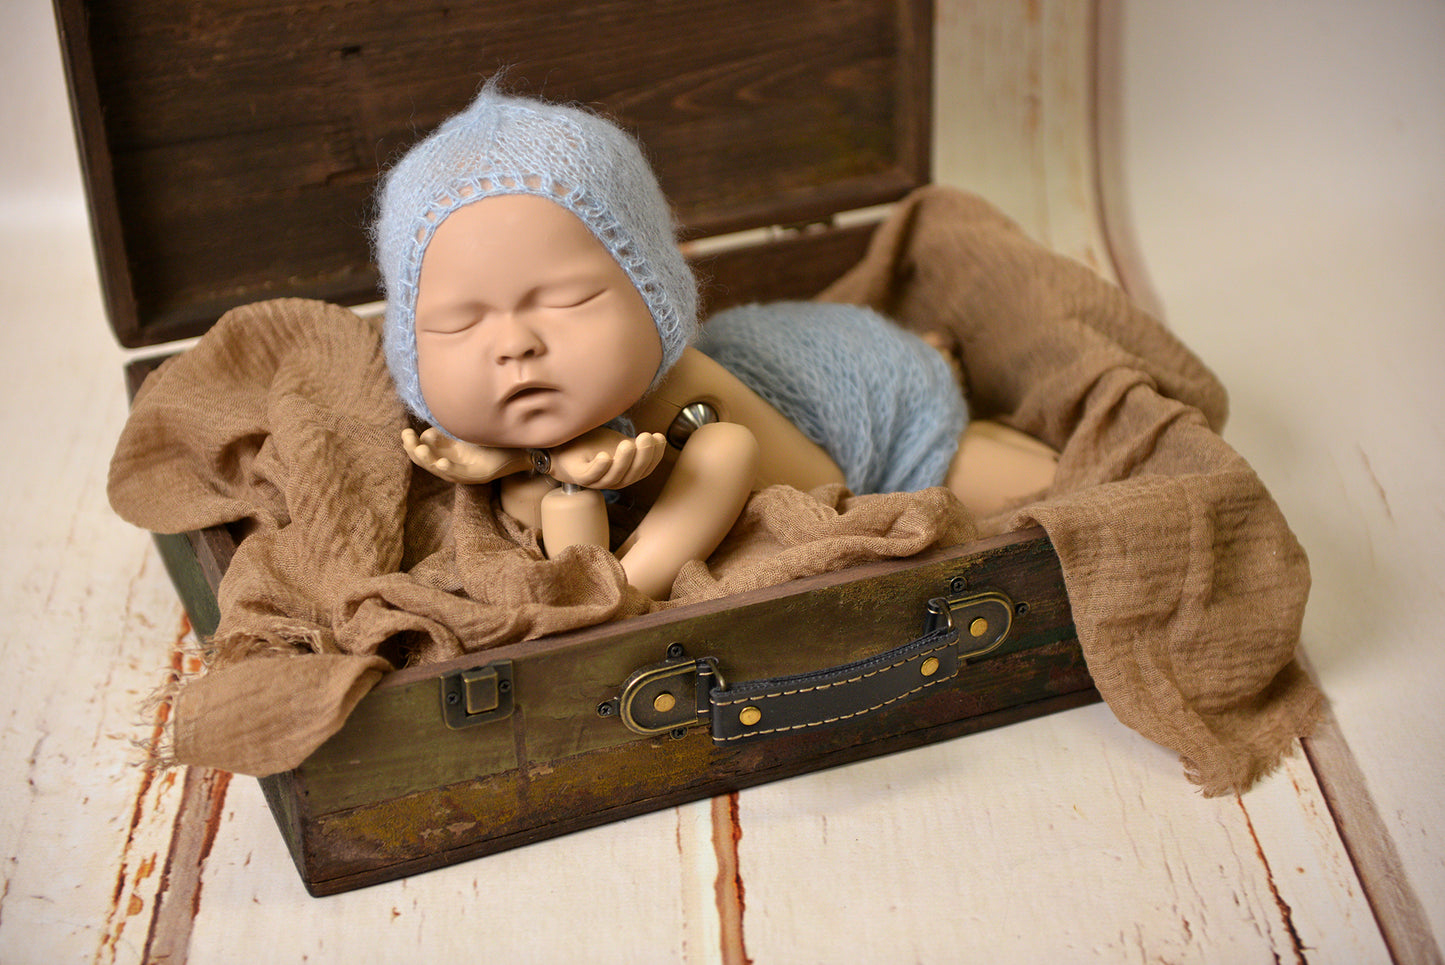 Suitcase Prop for newborn photography